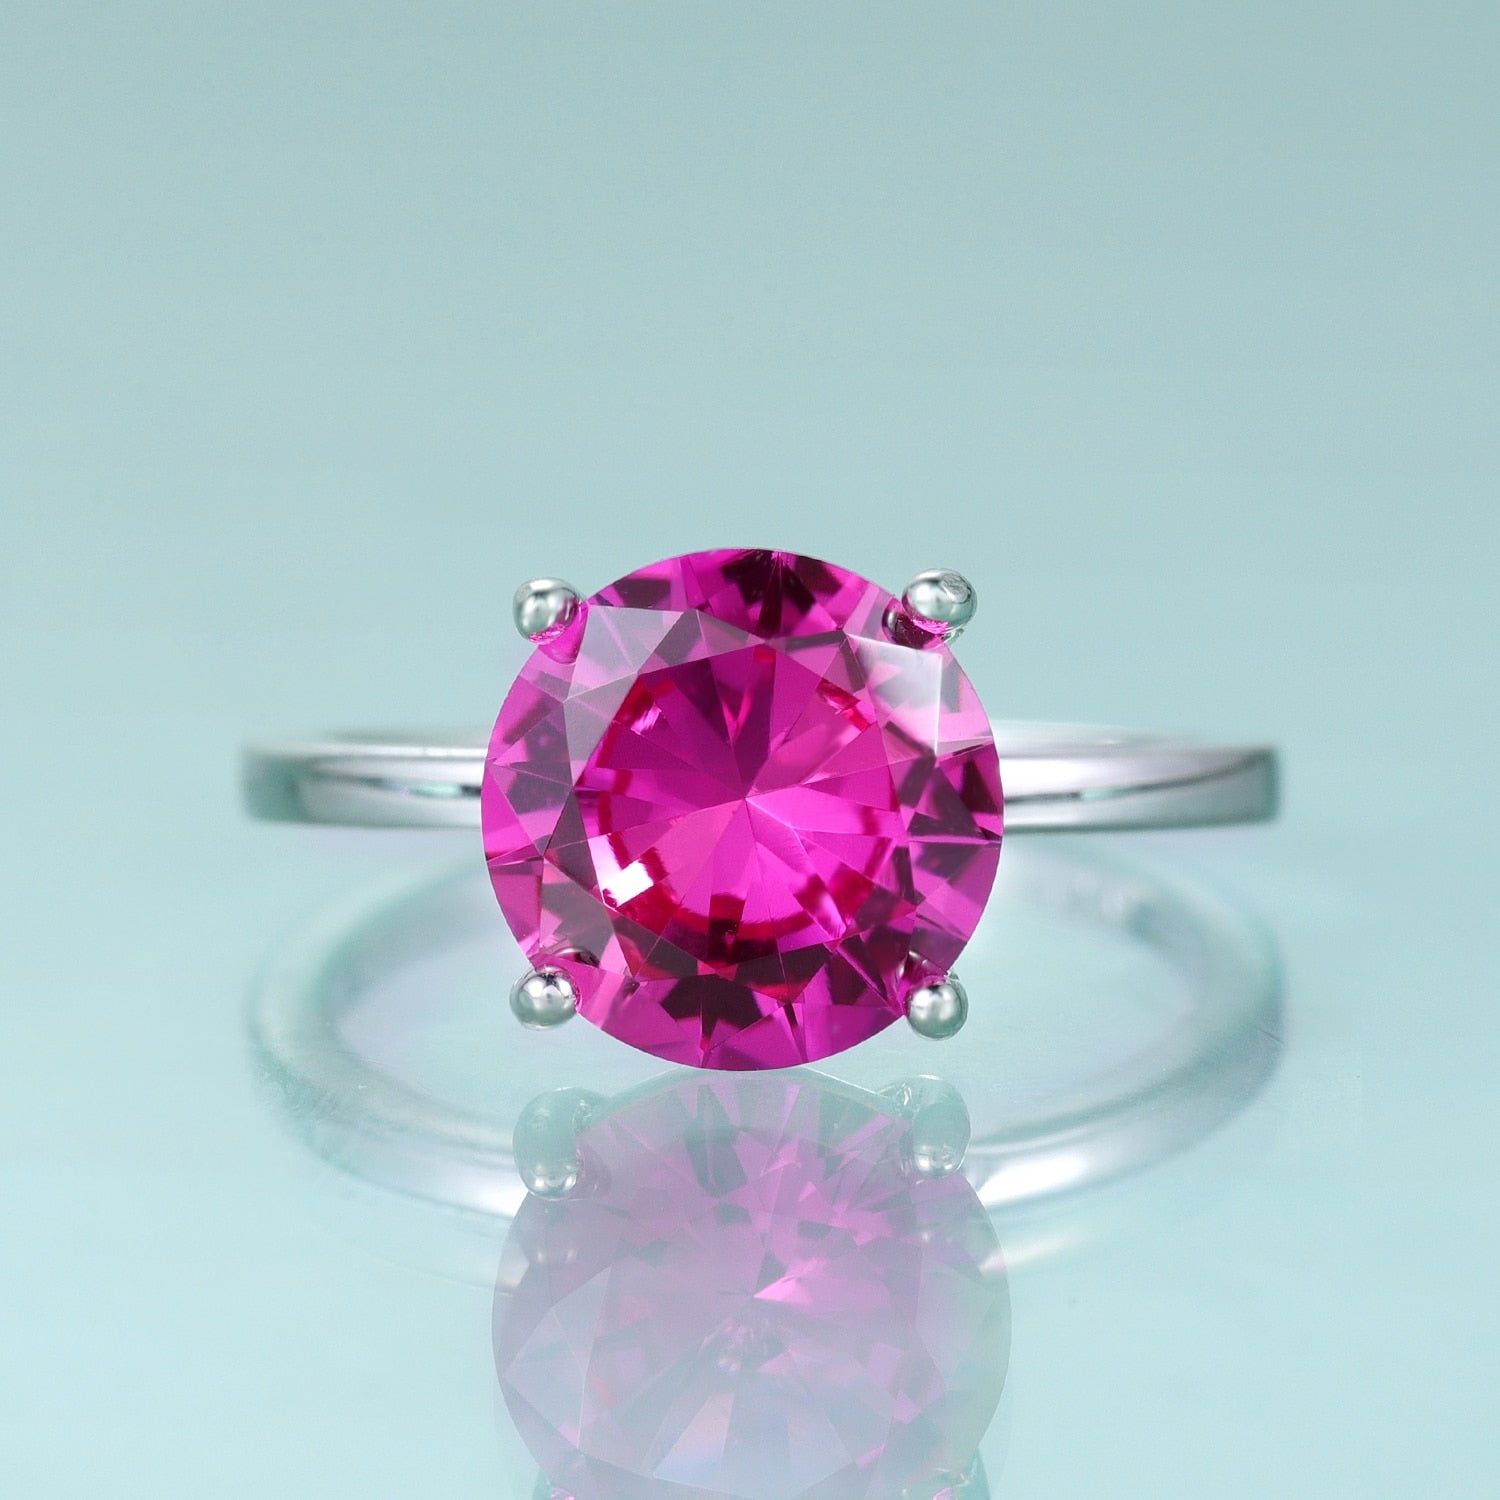 GEM'S BALLET Round Lab Pink Sapphire Four Prong Solitaire Engagement Rings 925 Sterling Silver Anniversary Promise Gift Ring